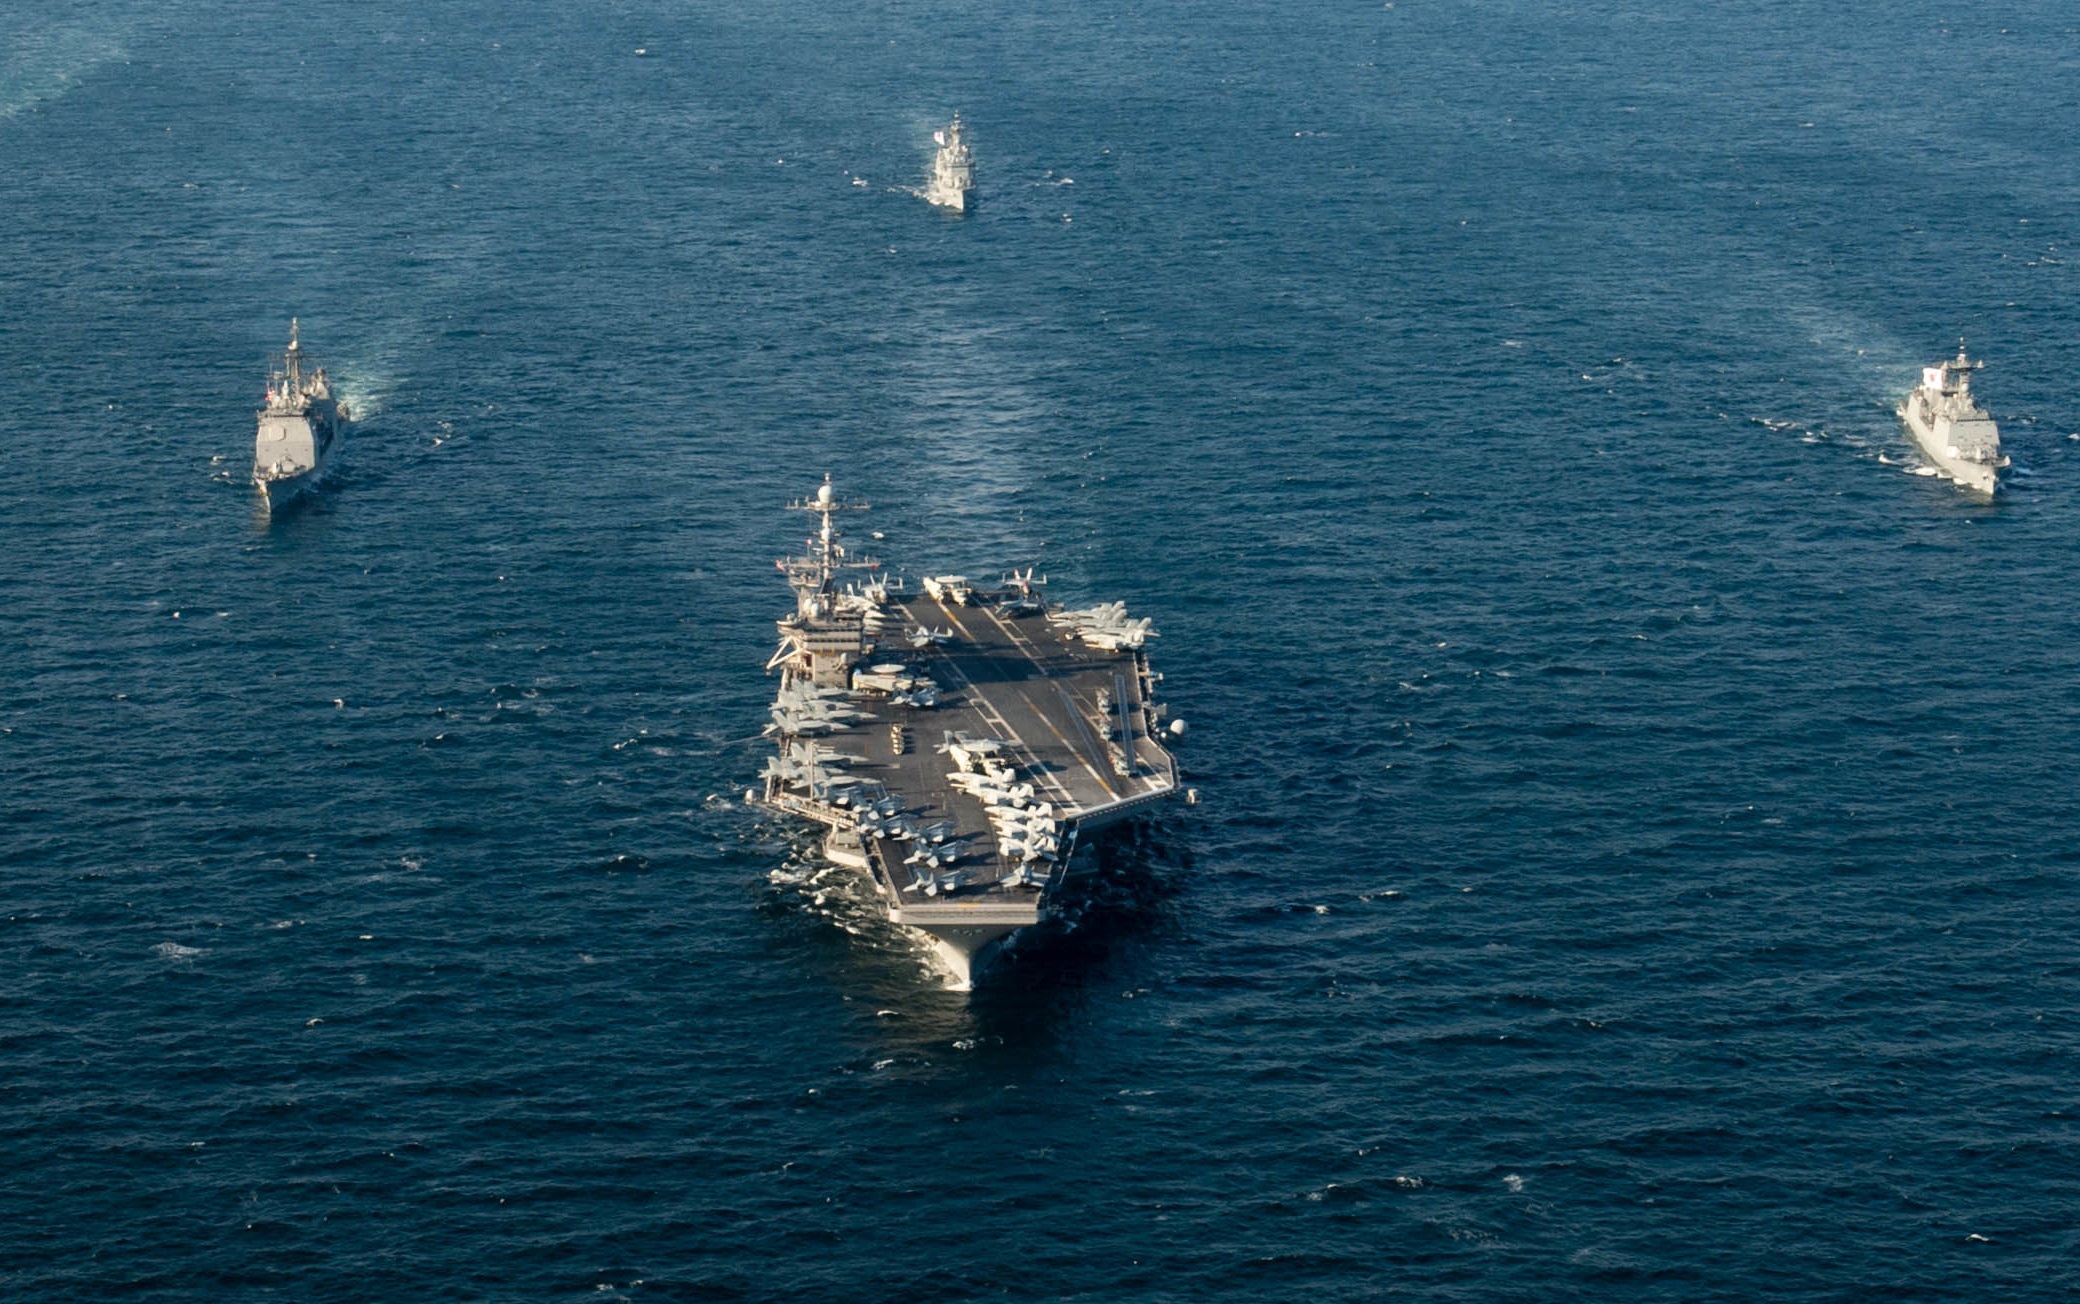 USS John C. Stennis refueling and complex overhaul contract announced